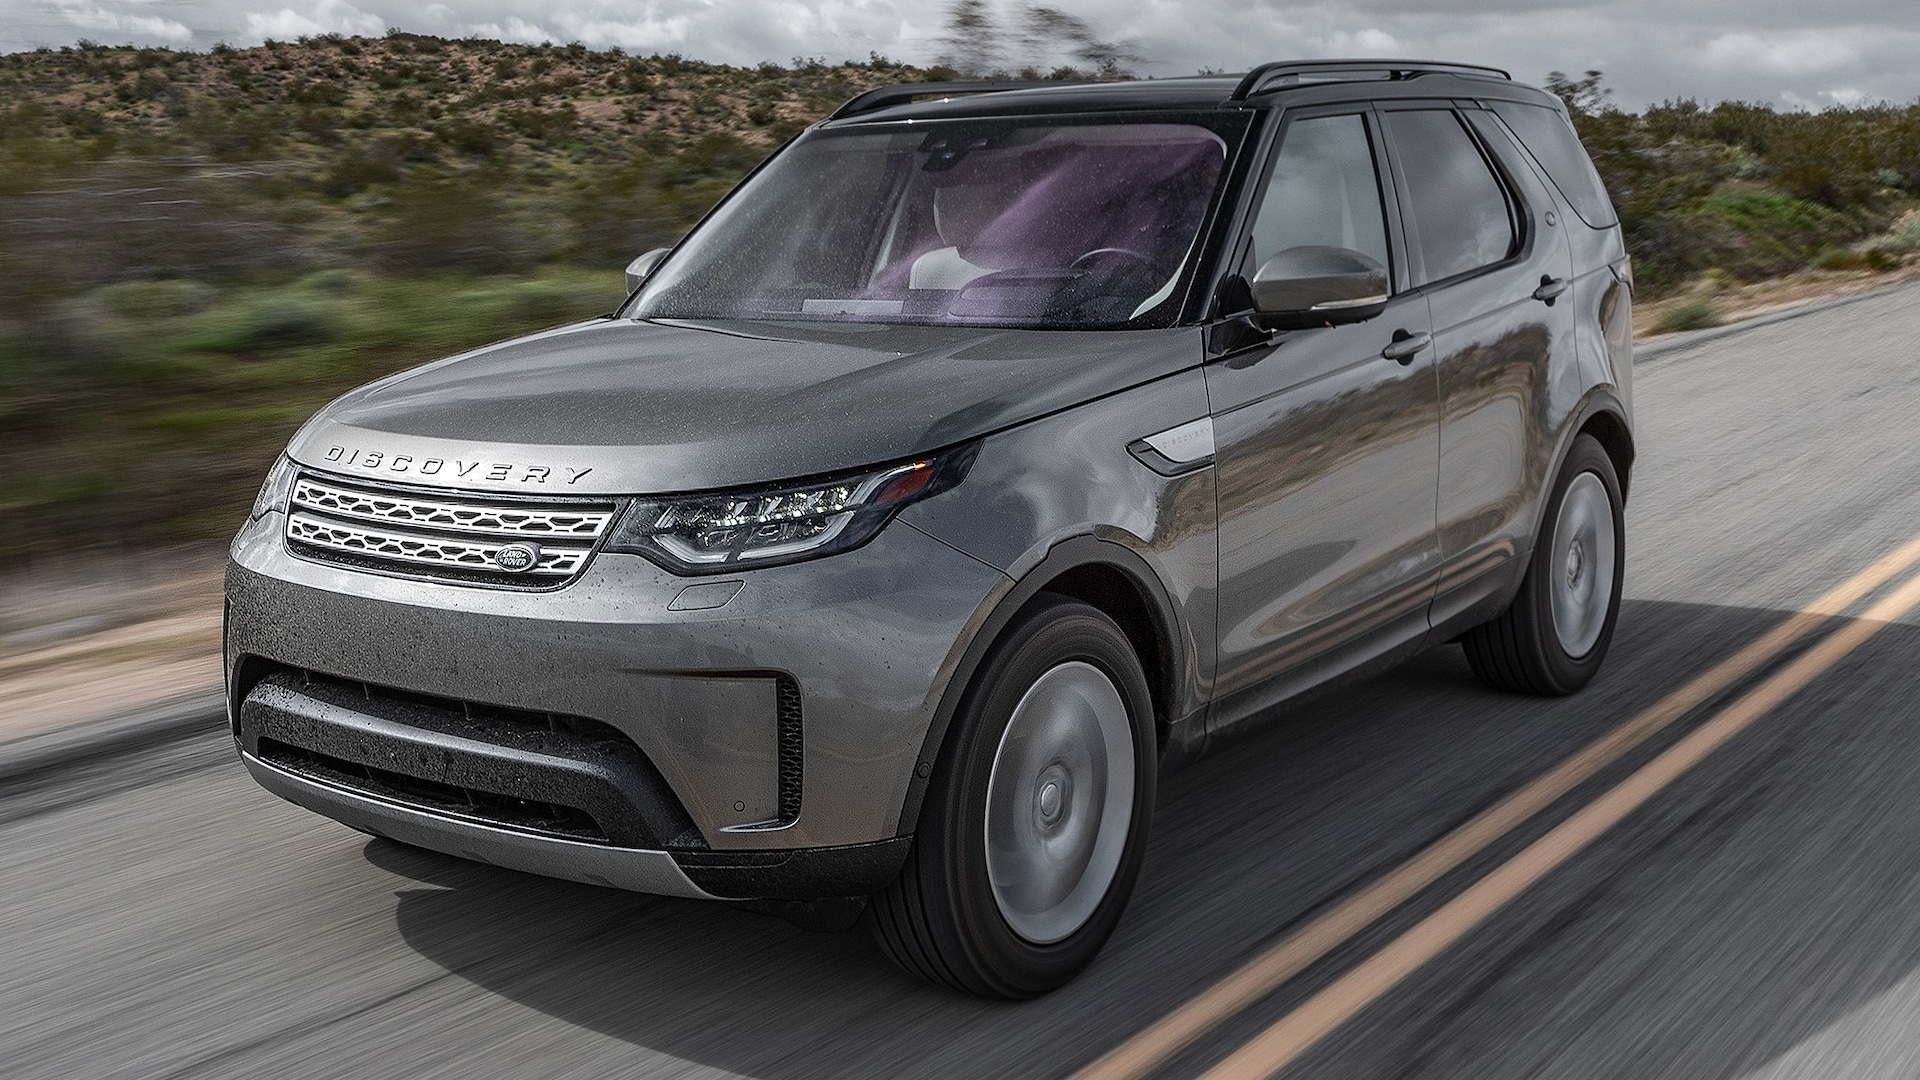 One Week With the 2020 Land Rover Discovery